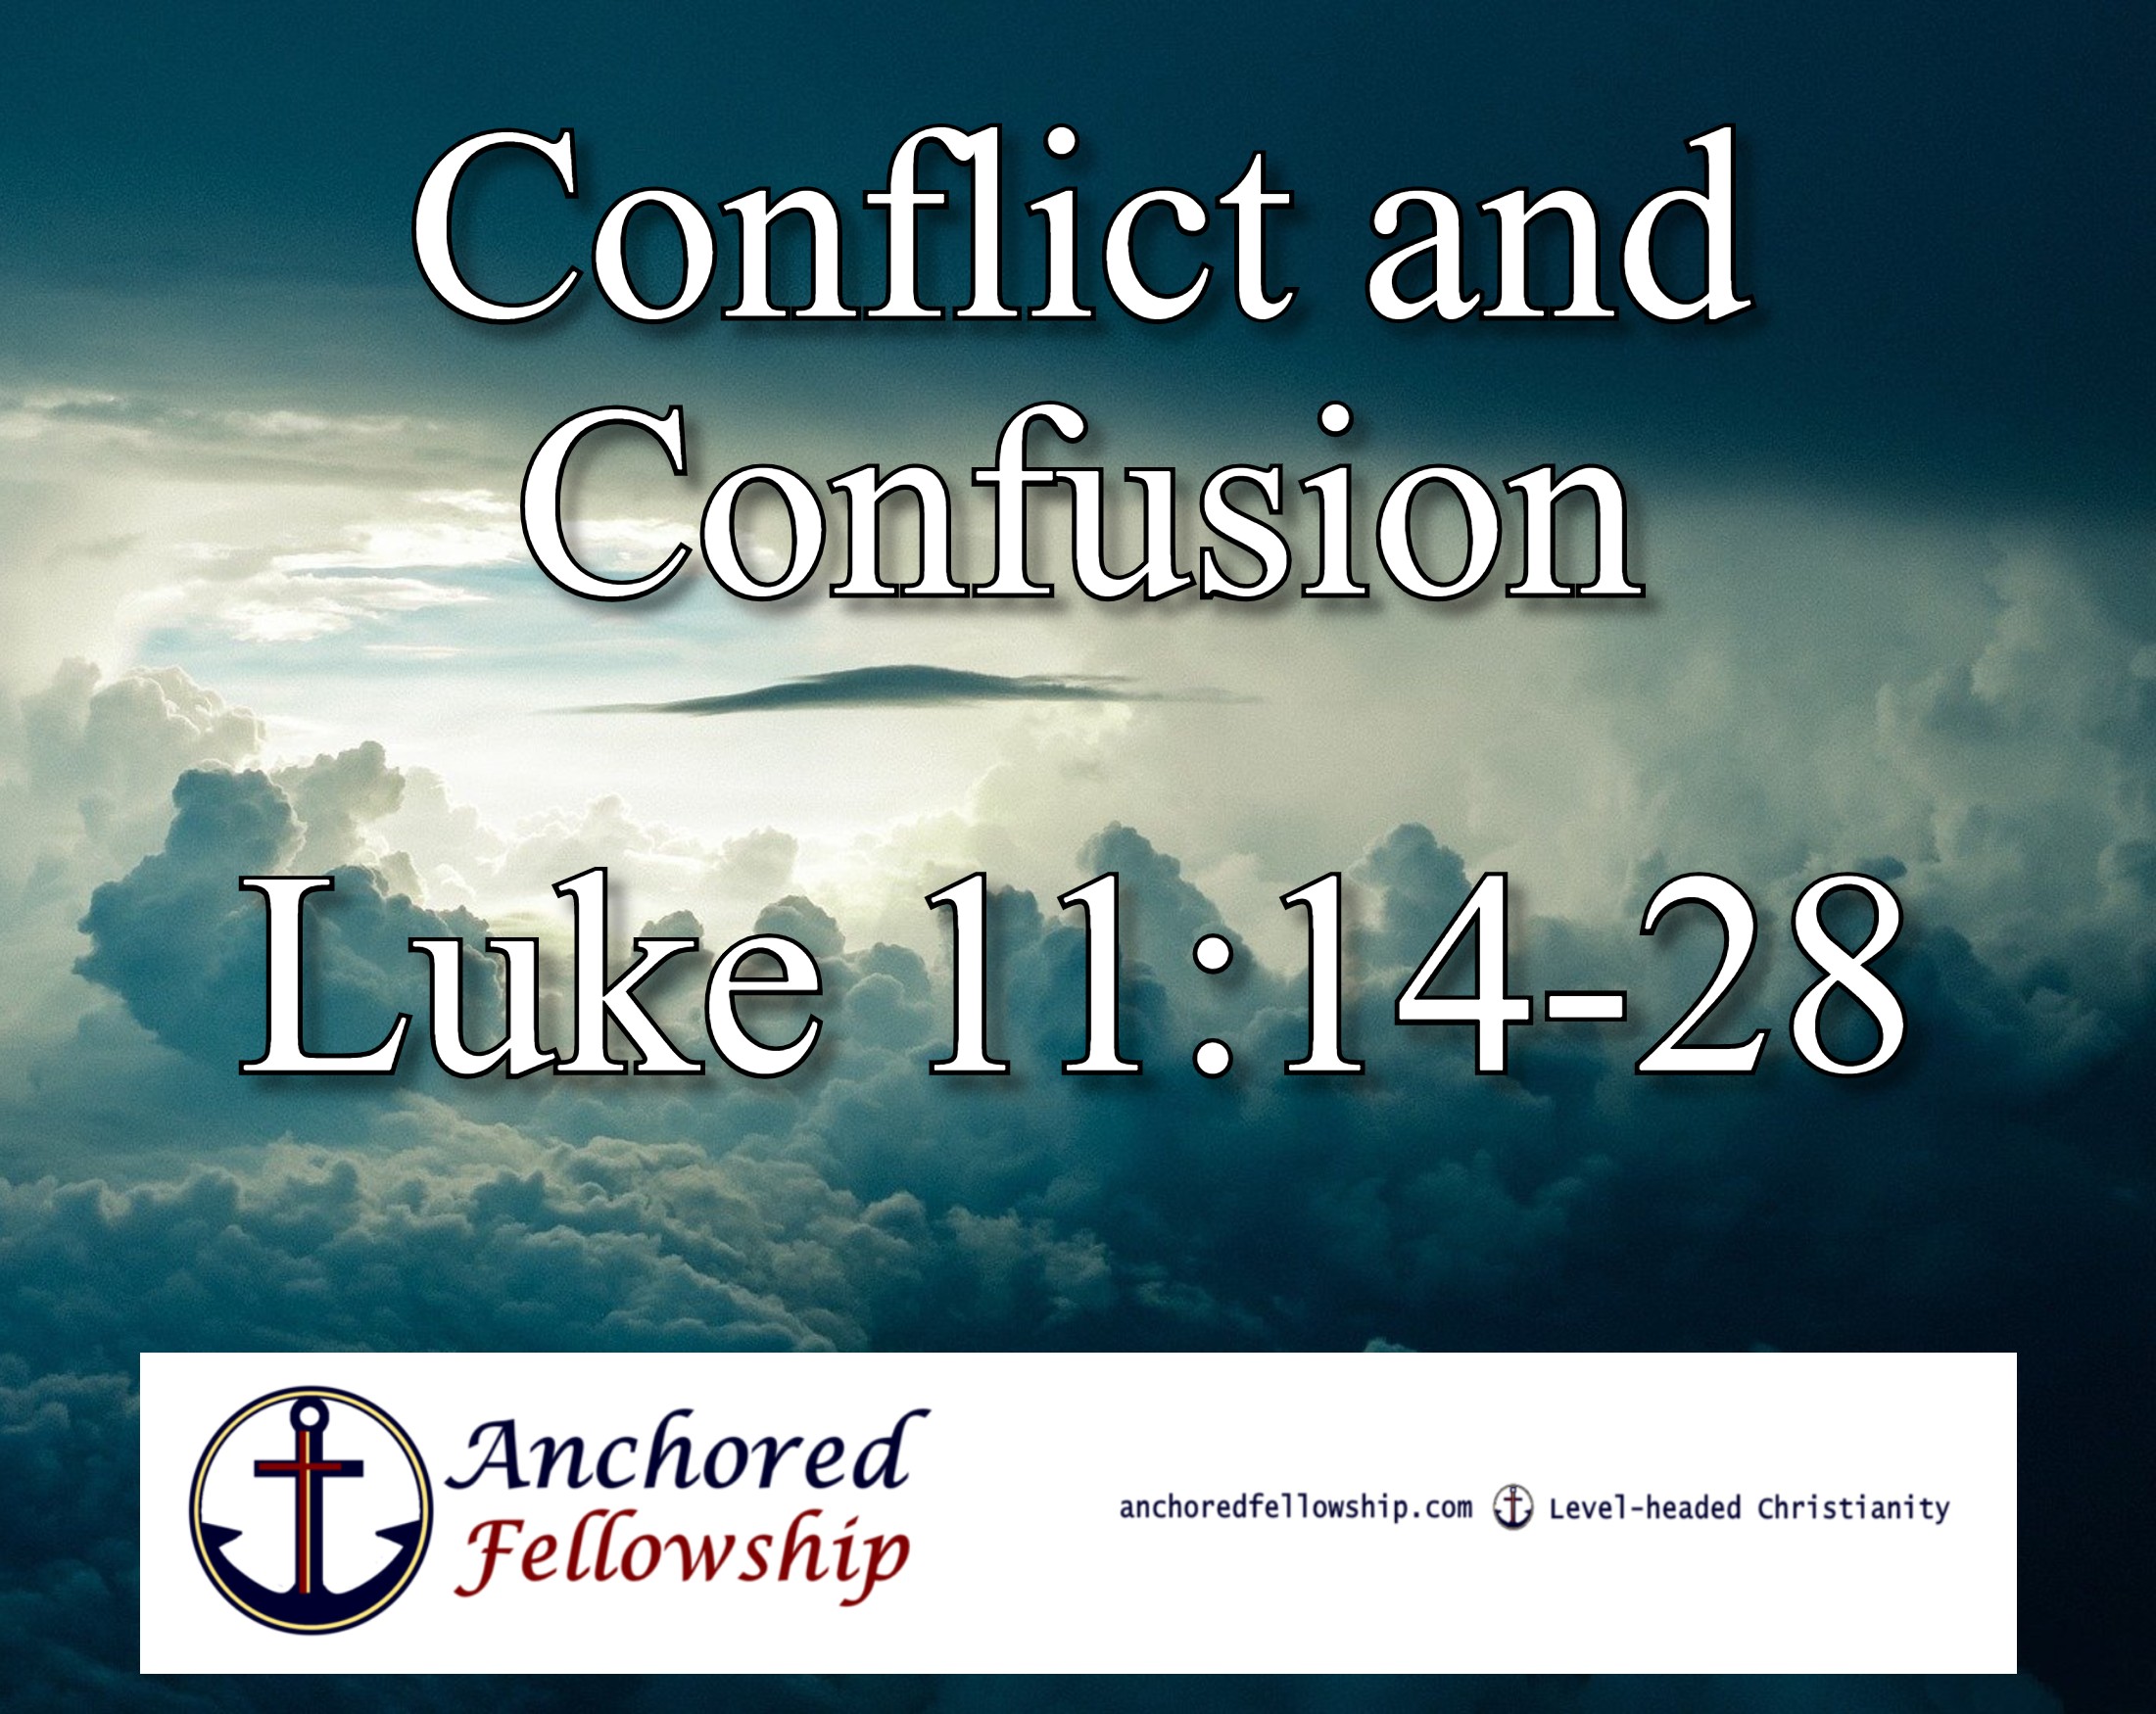 gospel of luke quote about conflict